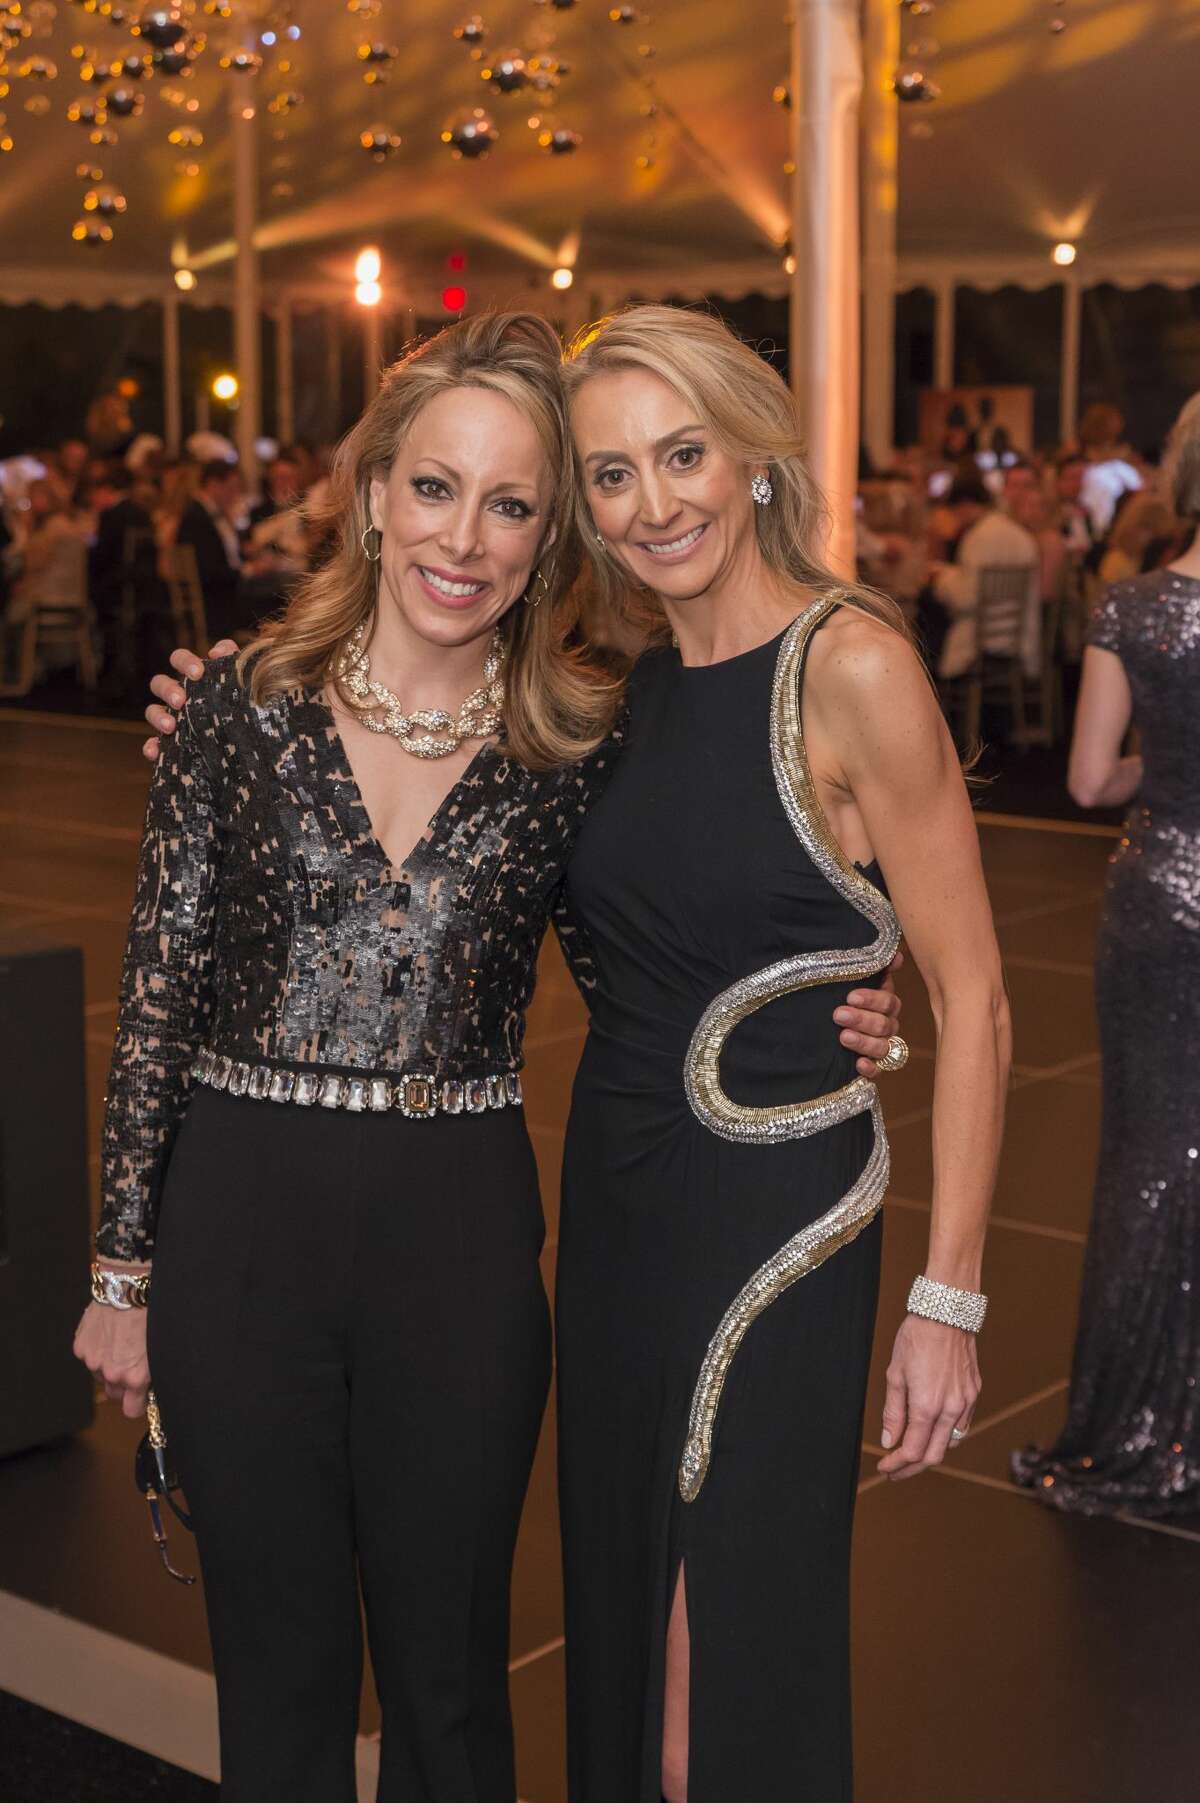 Kamie Lightburn and Felicity Kostakis at the Bruce Museum Renaissance Ball on May 14, 2016. The black tie fundraiser supports education and science initiatives at the Bruce Museum. The event was co-chaired by Felicity Kostakis and Kamie Lightburn. Sachiko and Lawrence Goodman were honored.